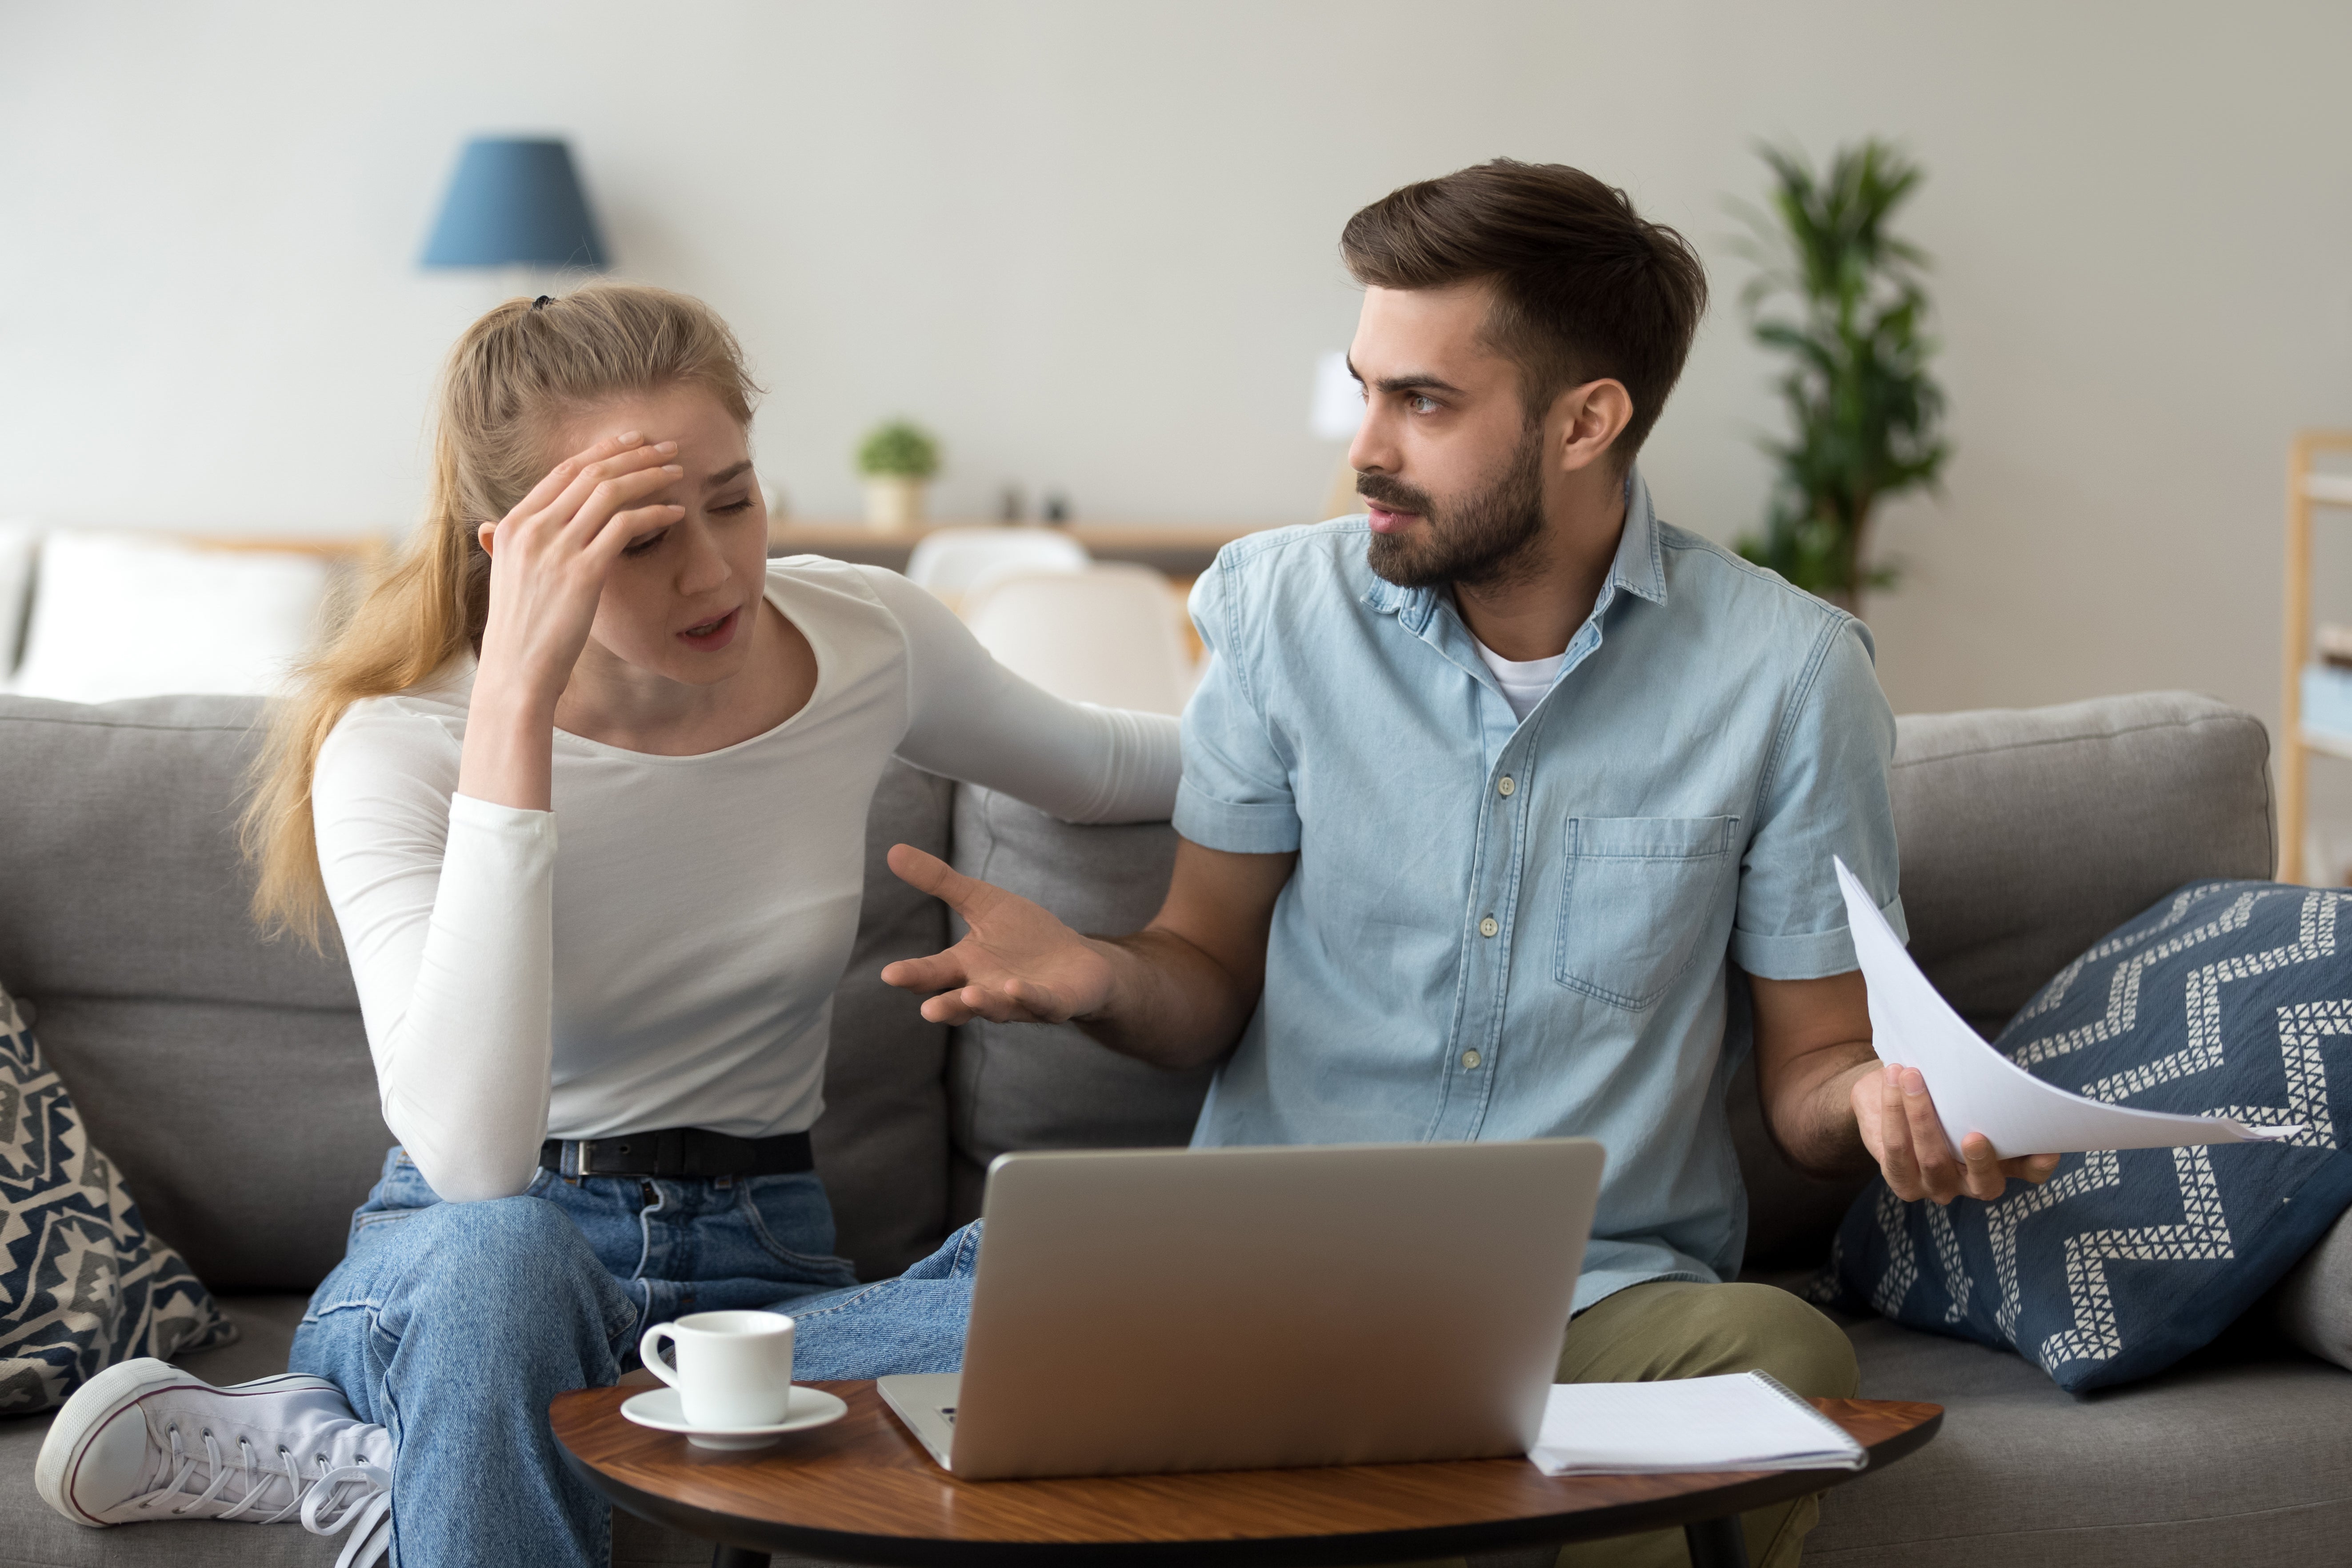 Man sparks debate after asking if he is wrong to place wife on a budget